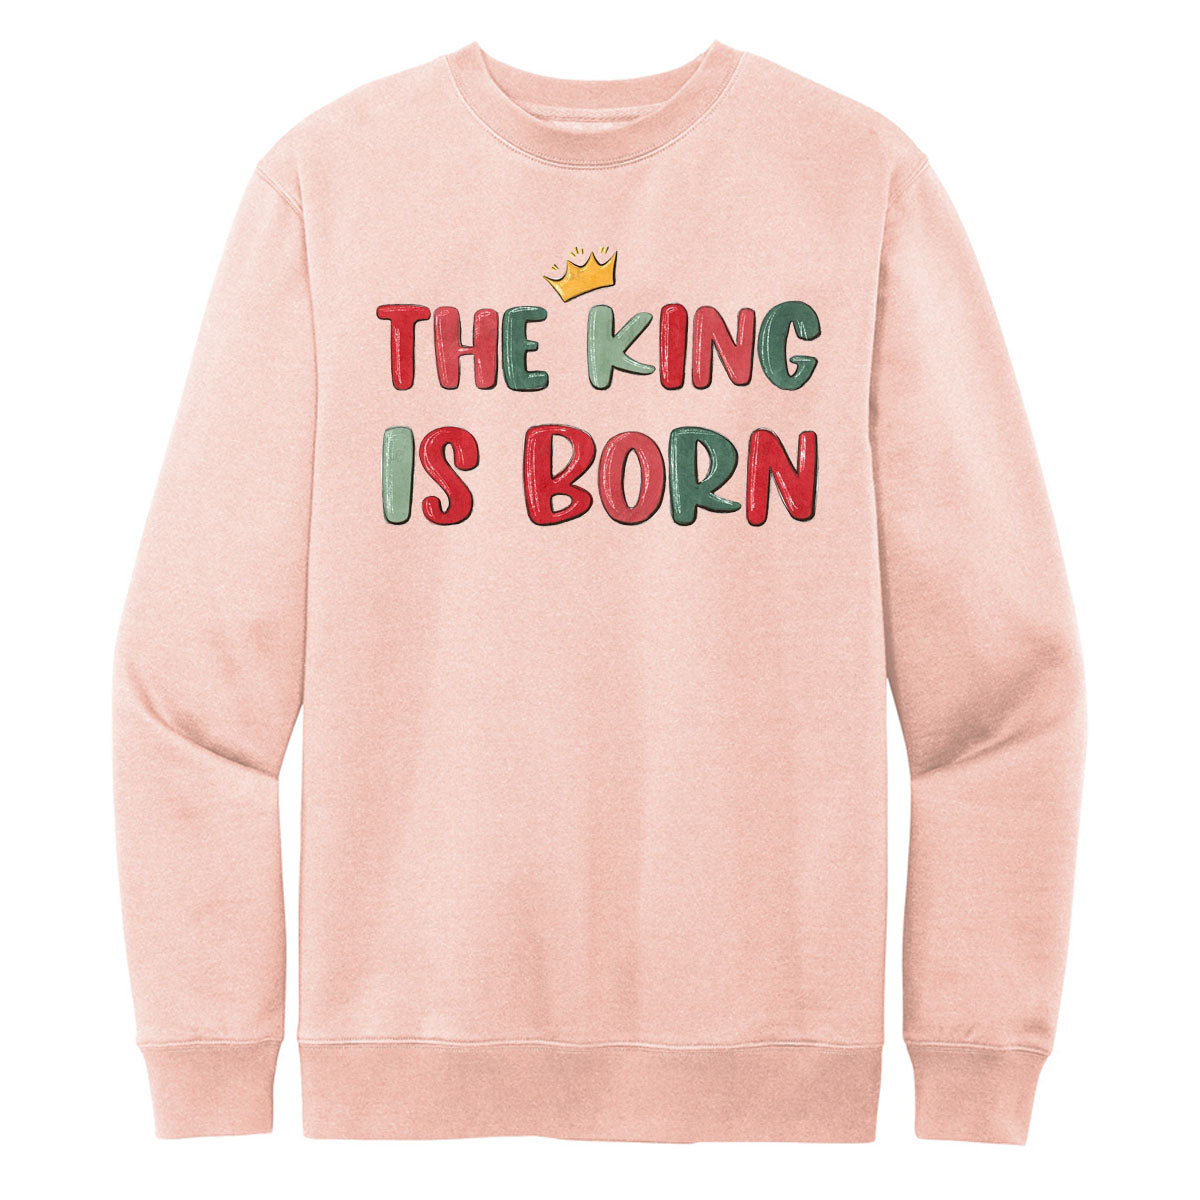 The King Is Born - Rosewater Pink District Fleece Sweatshirt/Hoodie (DT6100) - Southern Grace Creations